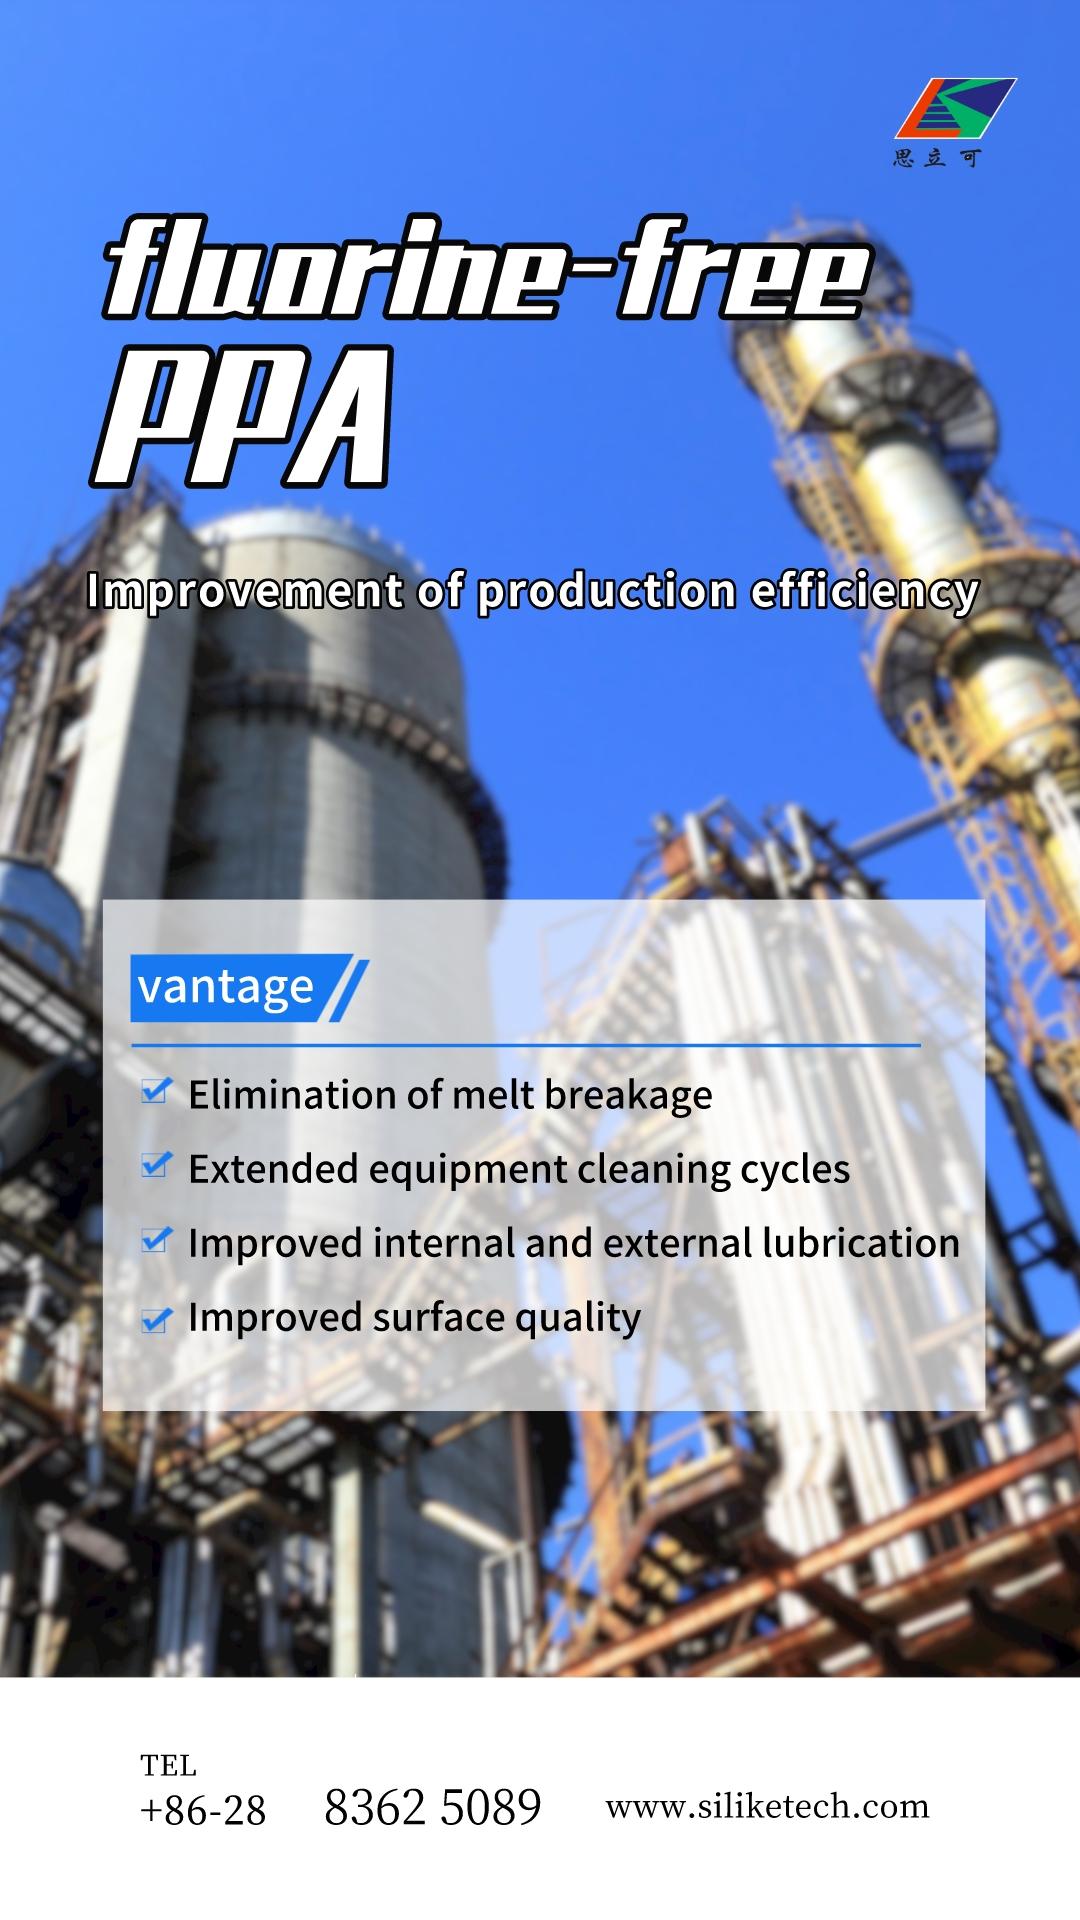 How fluorine-free PPA improves productivity in spinning processes?